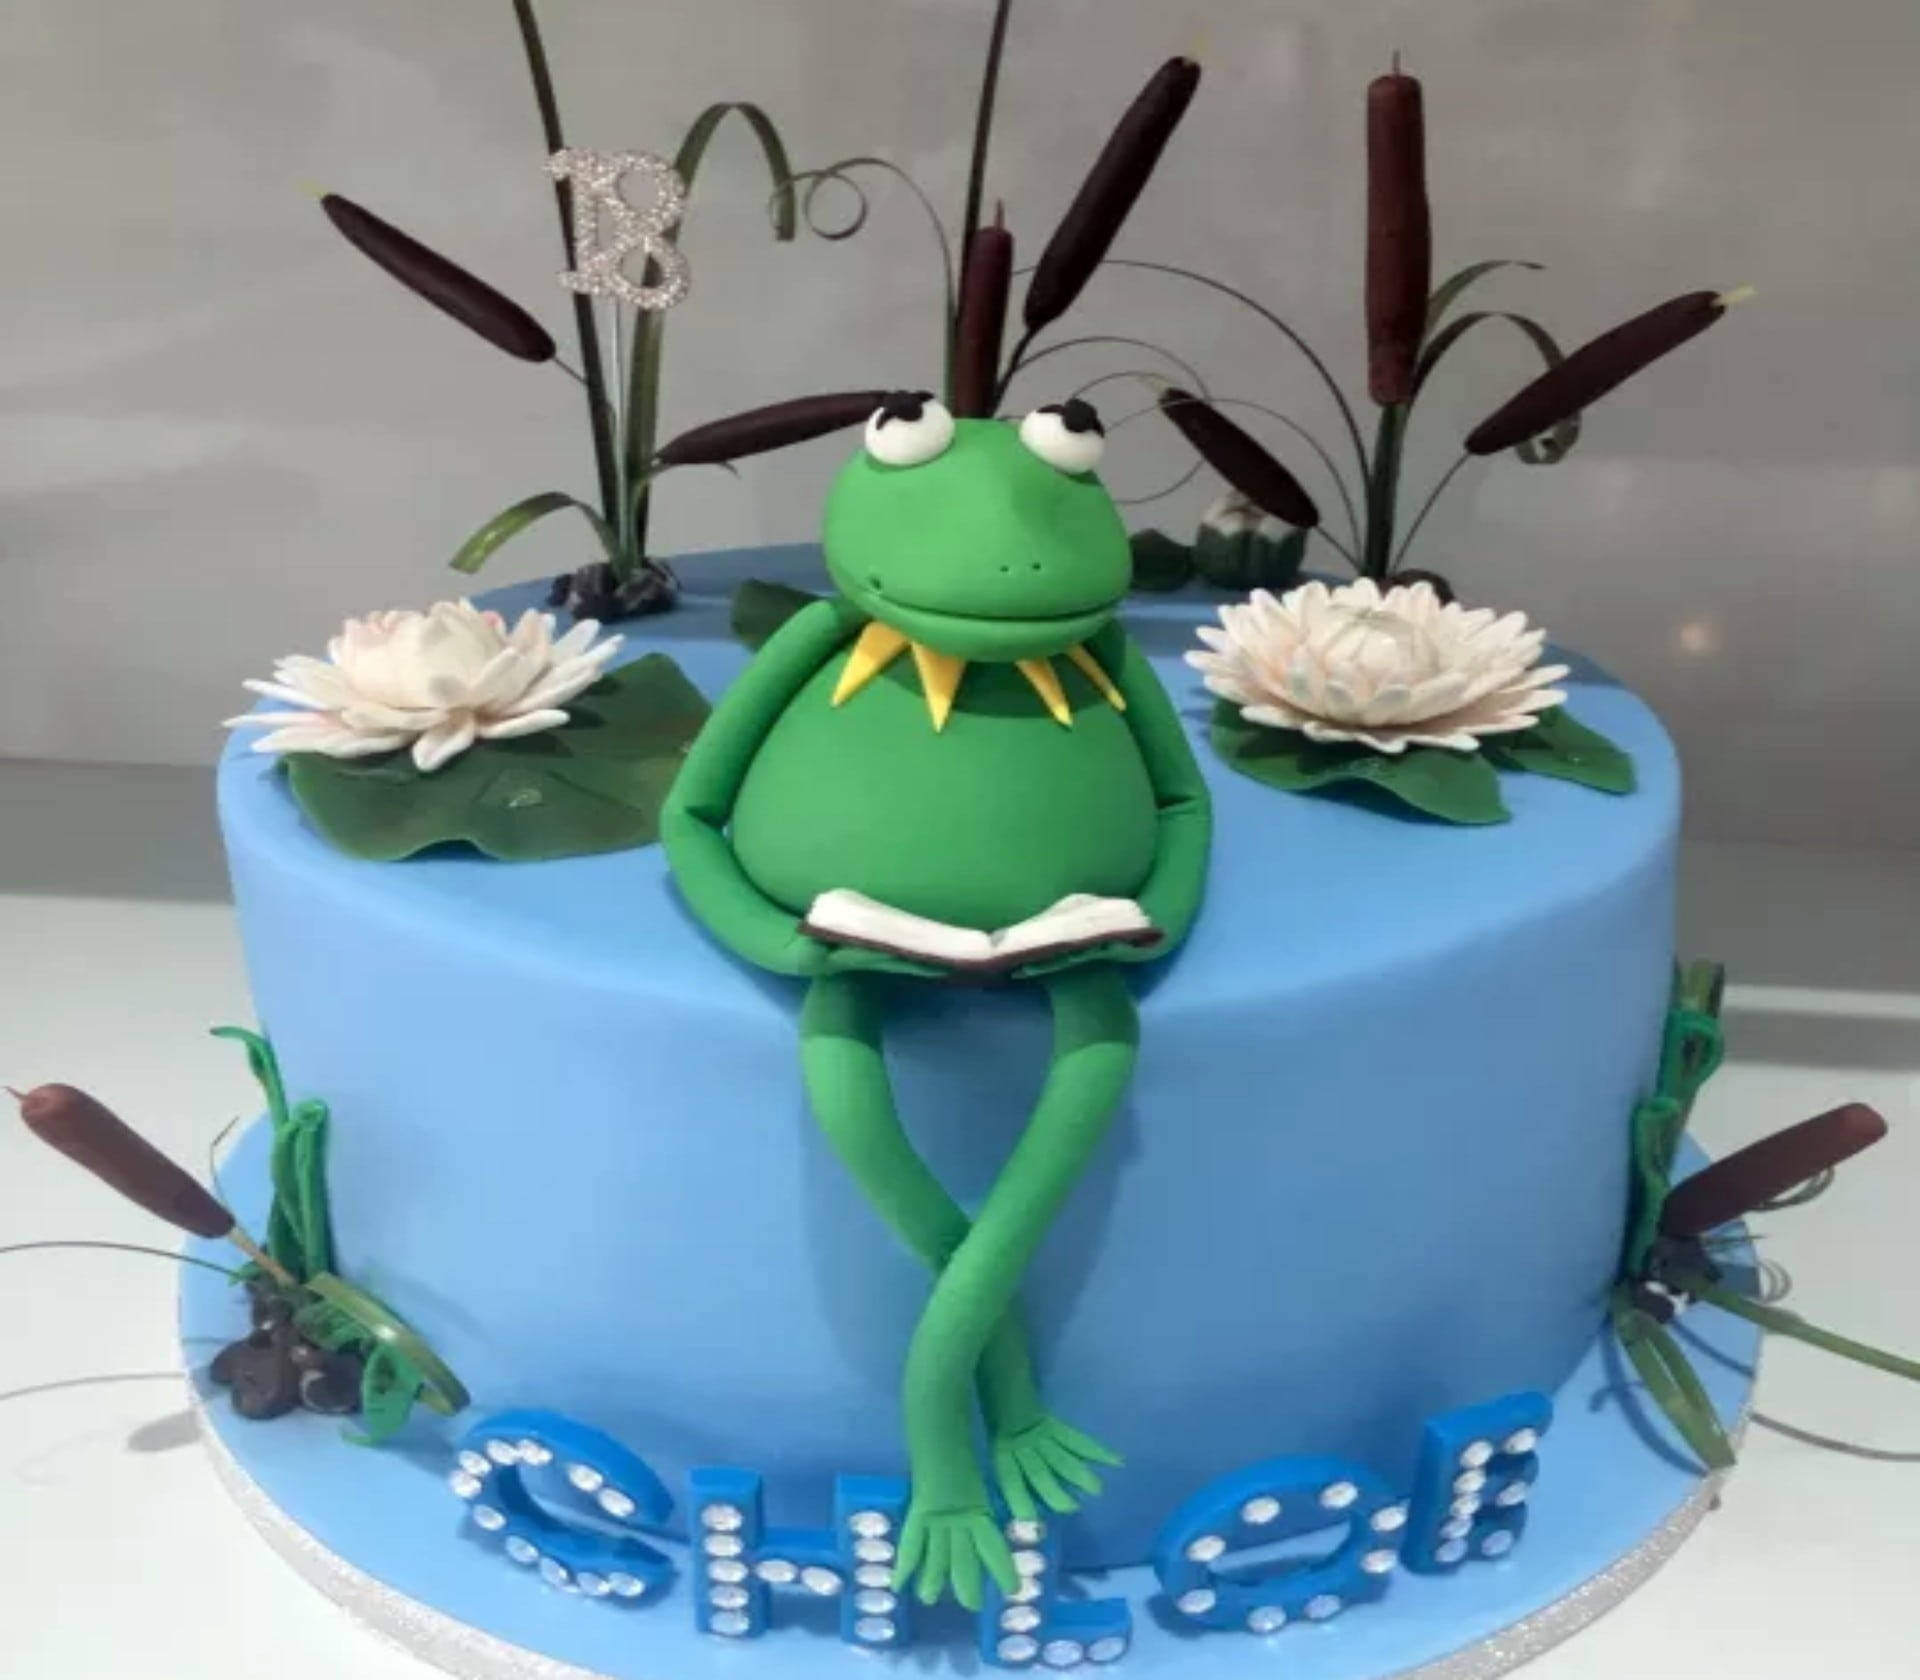 Delightful Kermit The Frog Cake Topper From The Muppets Background